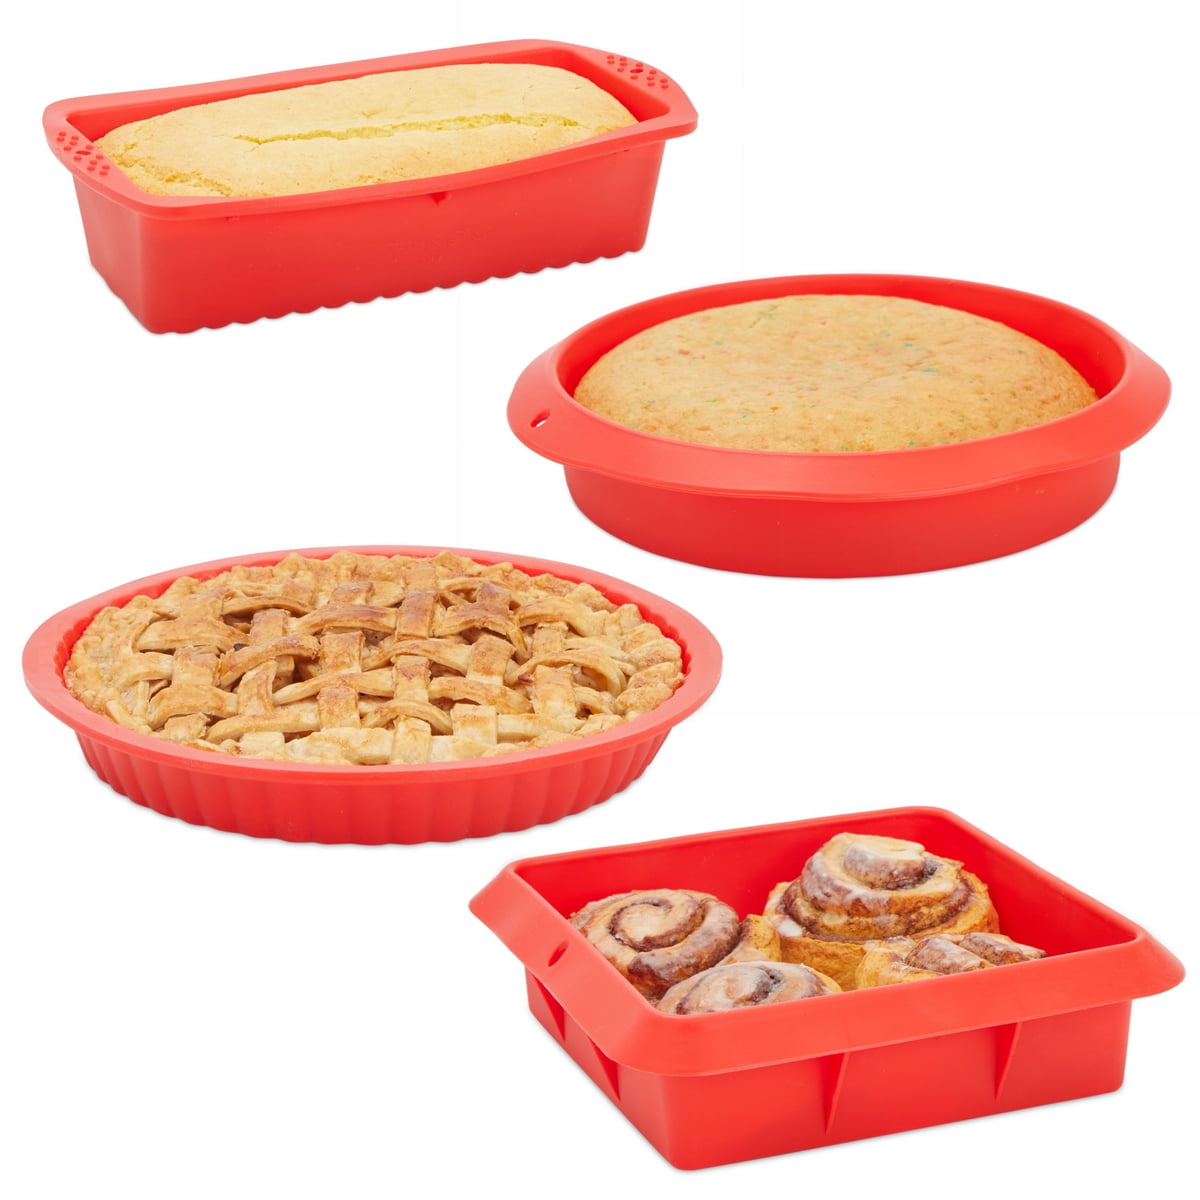 Details about   4/6/8" Silicone Round Bread Mold Cake Pan Muffin Bakeware Baking Mould 